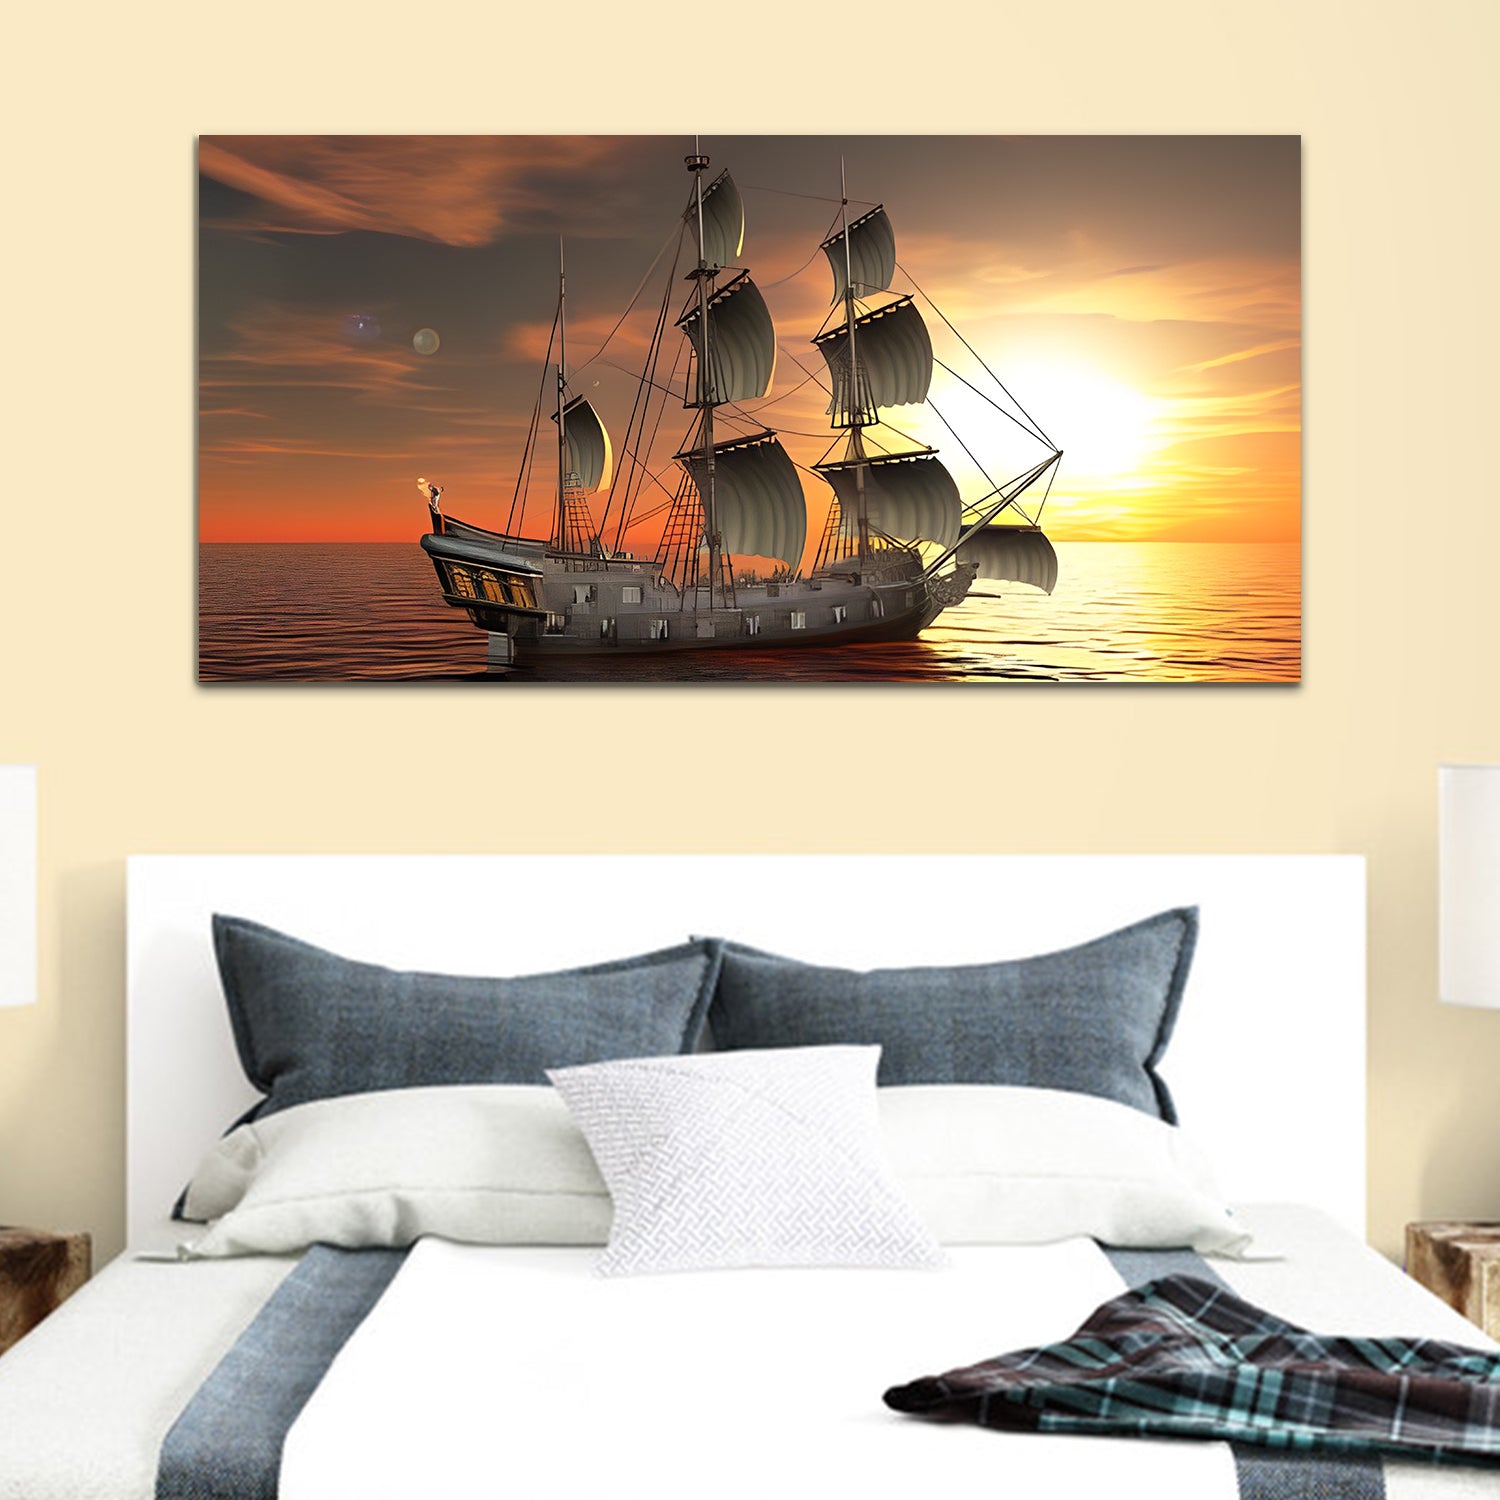 Yellow & Grey Boat Evening Canvas Painting Wall Art